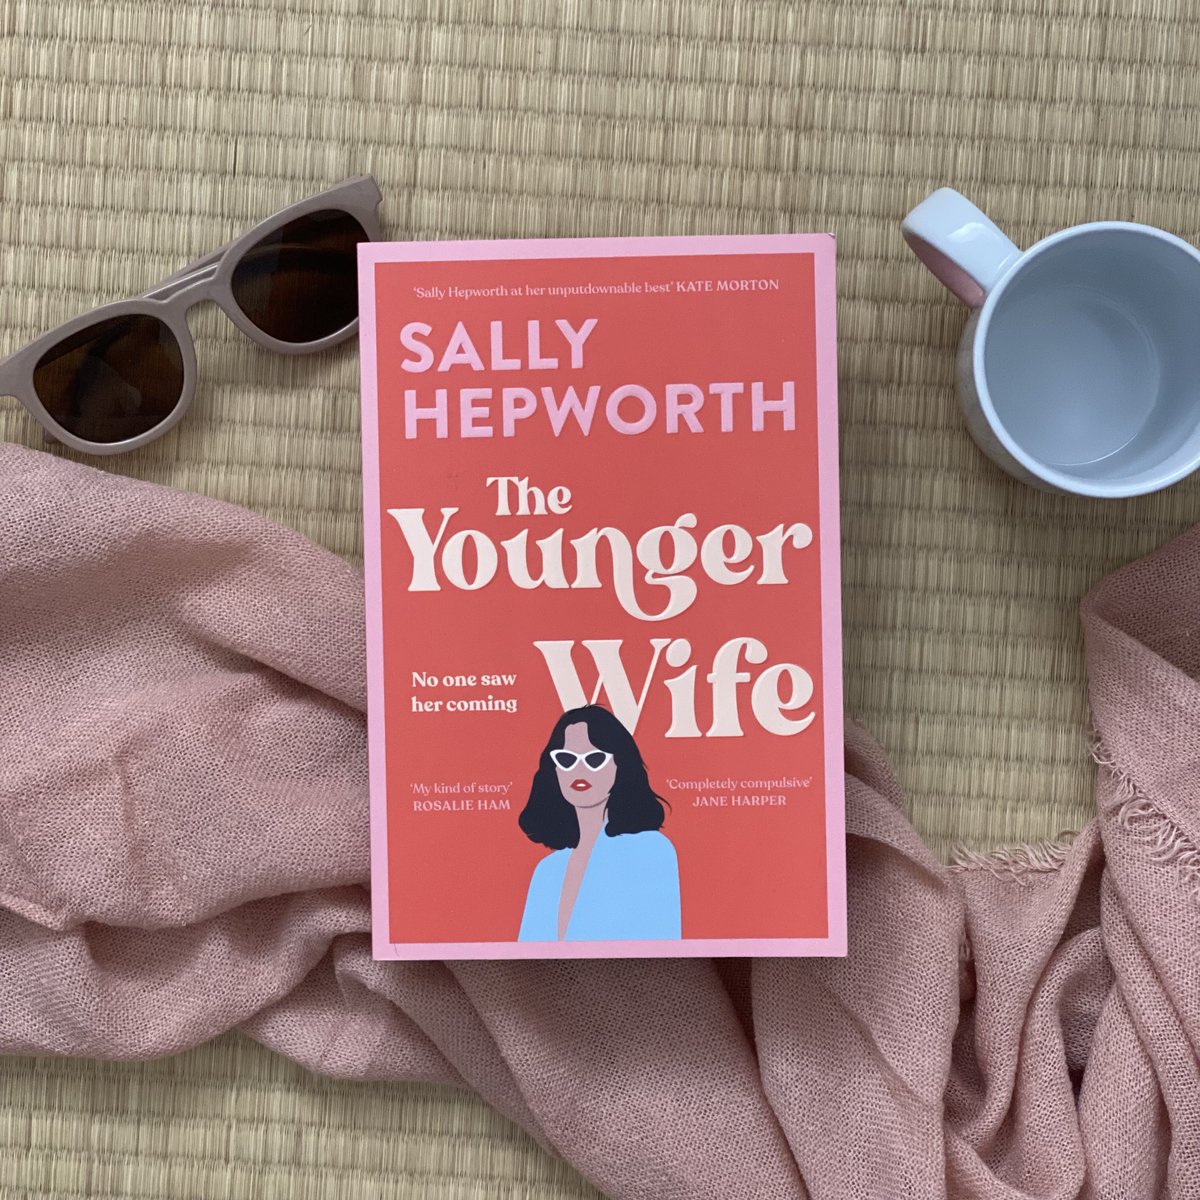 The moment she laid eyes on Heather Wisher, Tully knew this woman was going to destroy their lives. 'The Younger Wife' is the new novel from @SallyHepworth, out now! Buy it now at all good book stores. ow.ly/1R2F30rY5SE